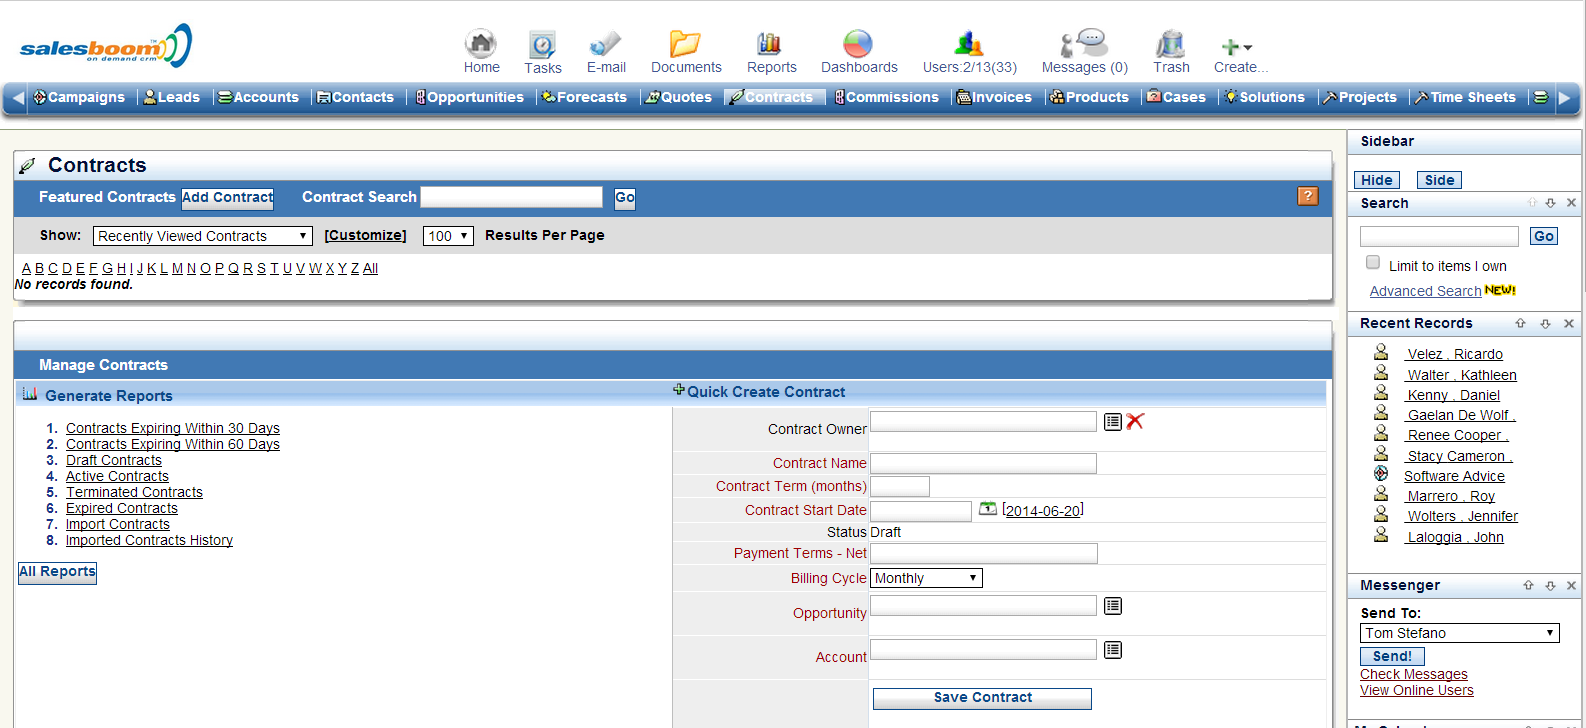 Crm-contract-management-screenshot-large